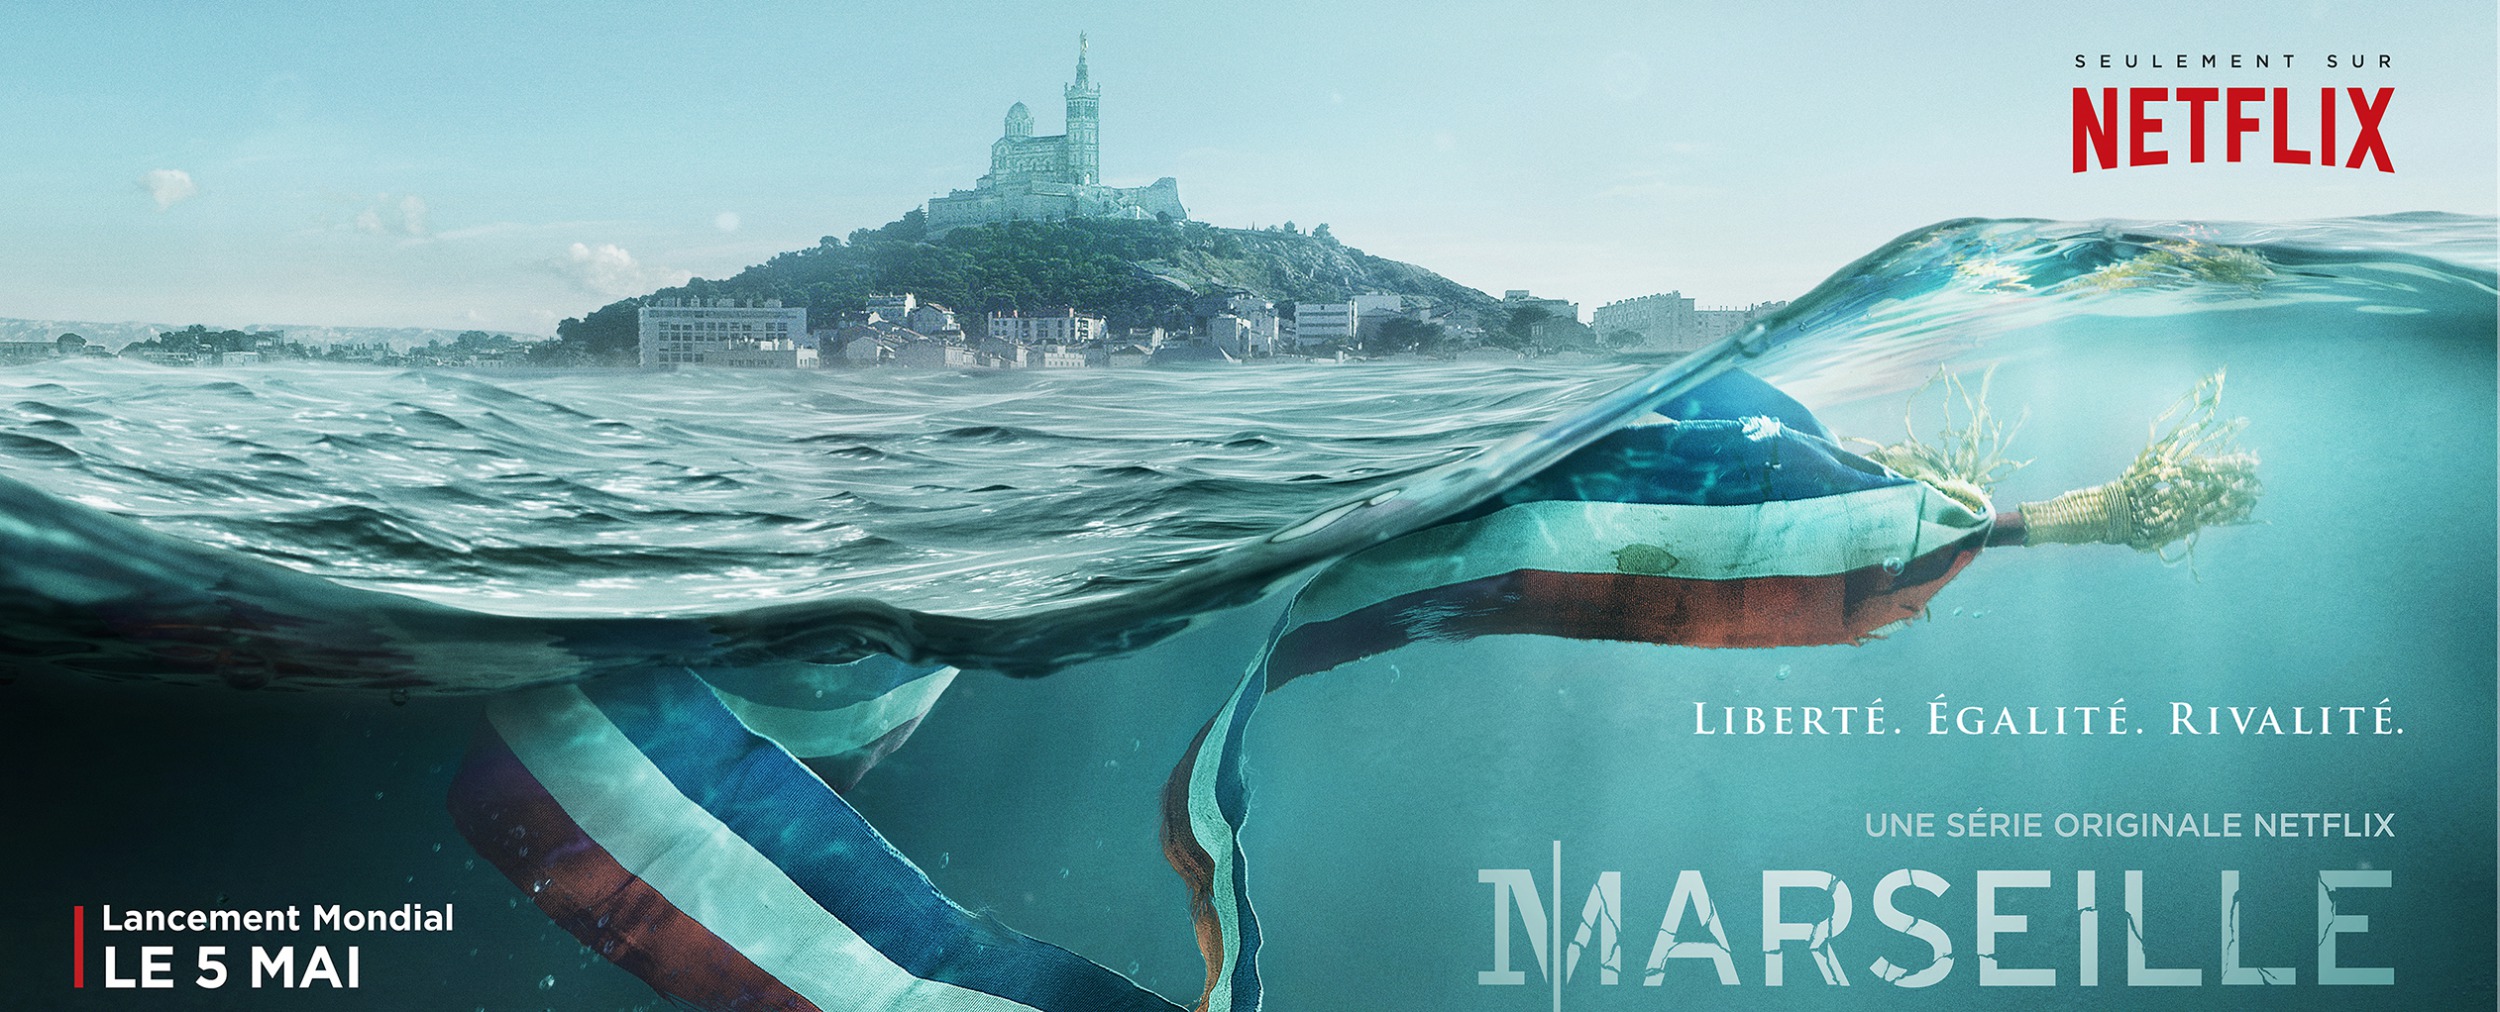 Mega Sized Movie Poster Image for Marseille (#5 of 15)